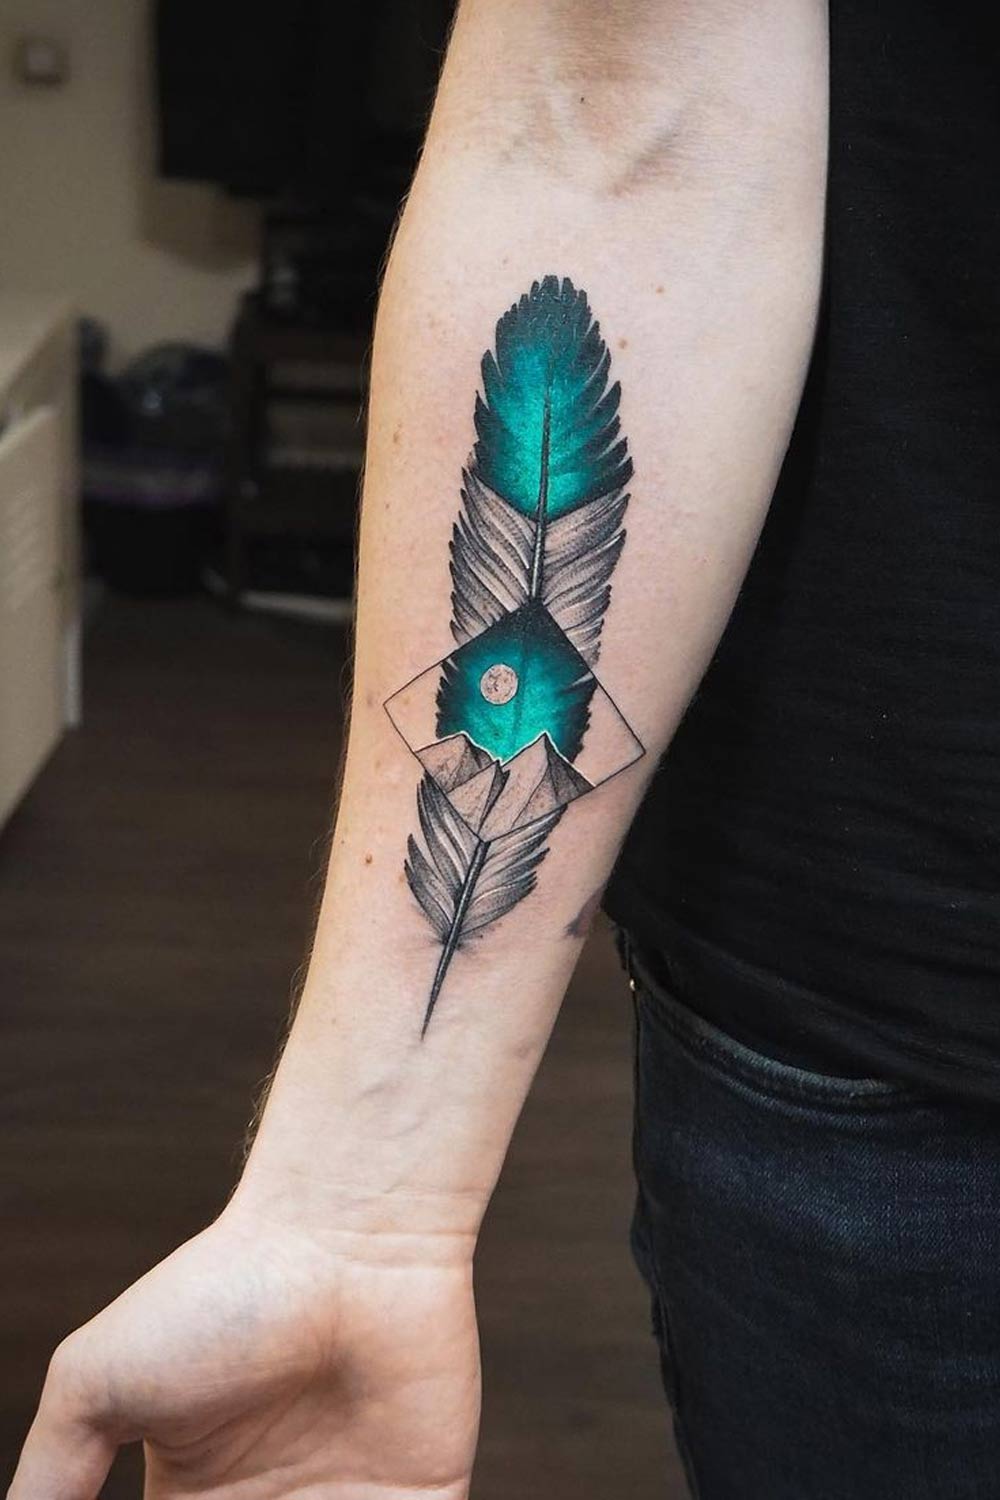 Beautiful Feather with Geometric Elements Tattoo